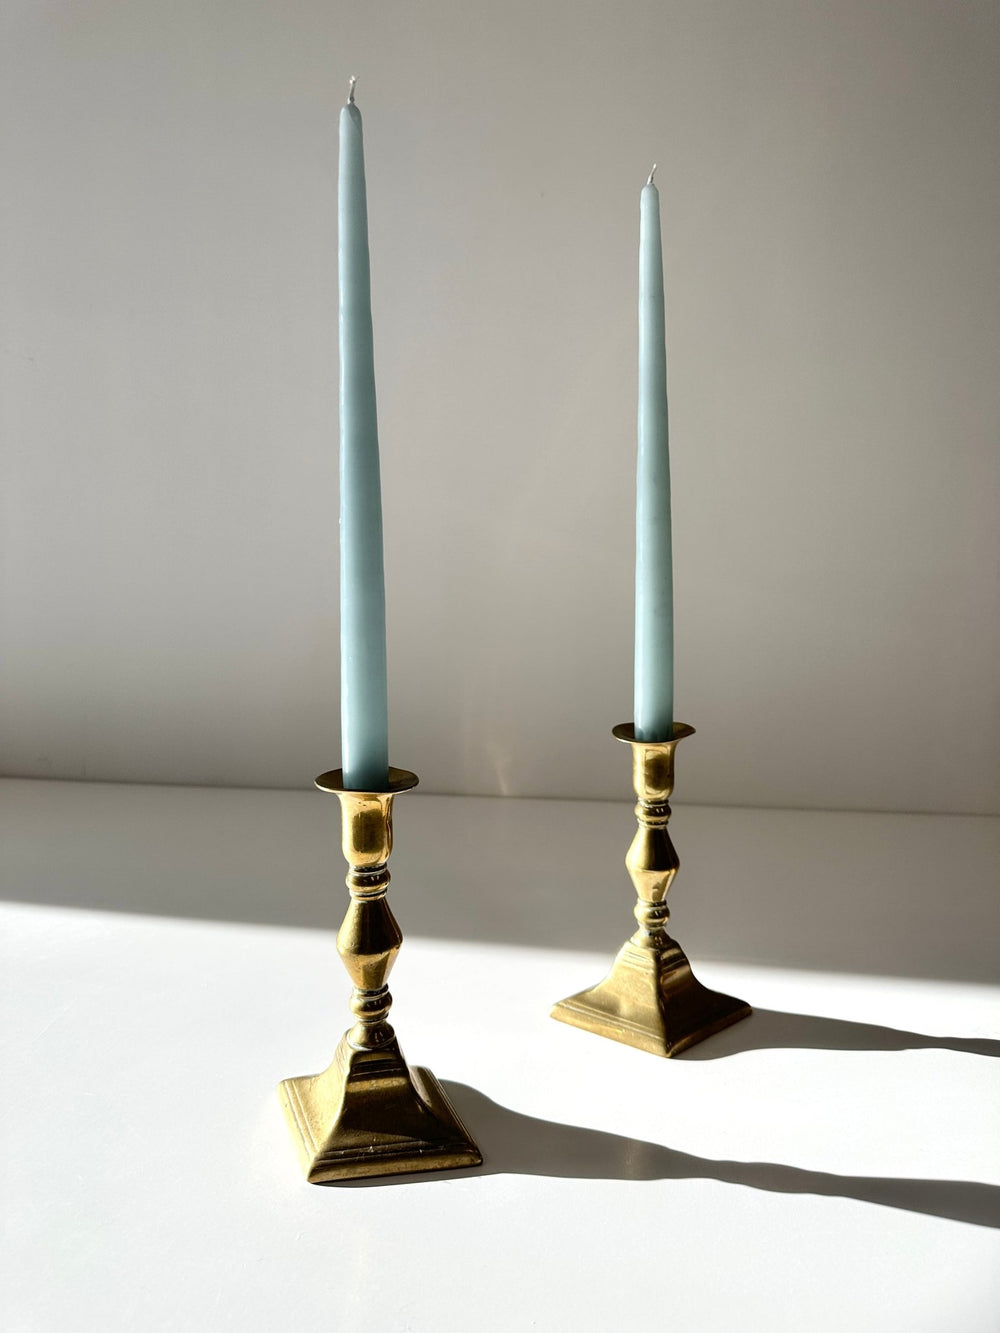 Set of 2 Vintage Brass Candlesticks + Candles - Pretty by Her- handmade locally in Cambridge, Ontario